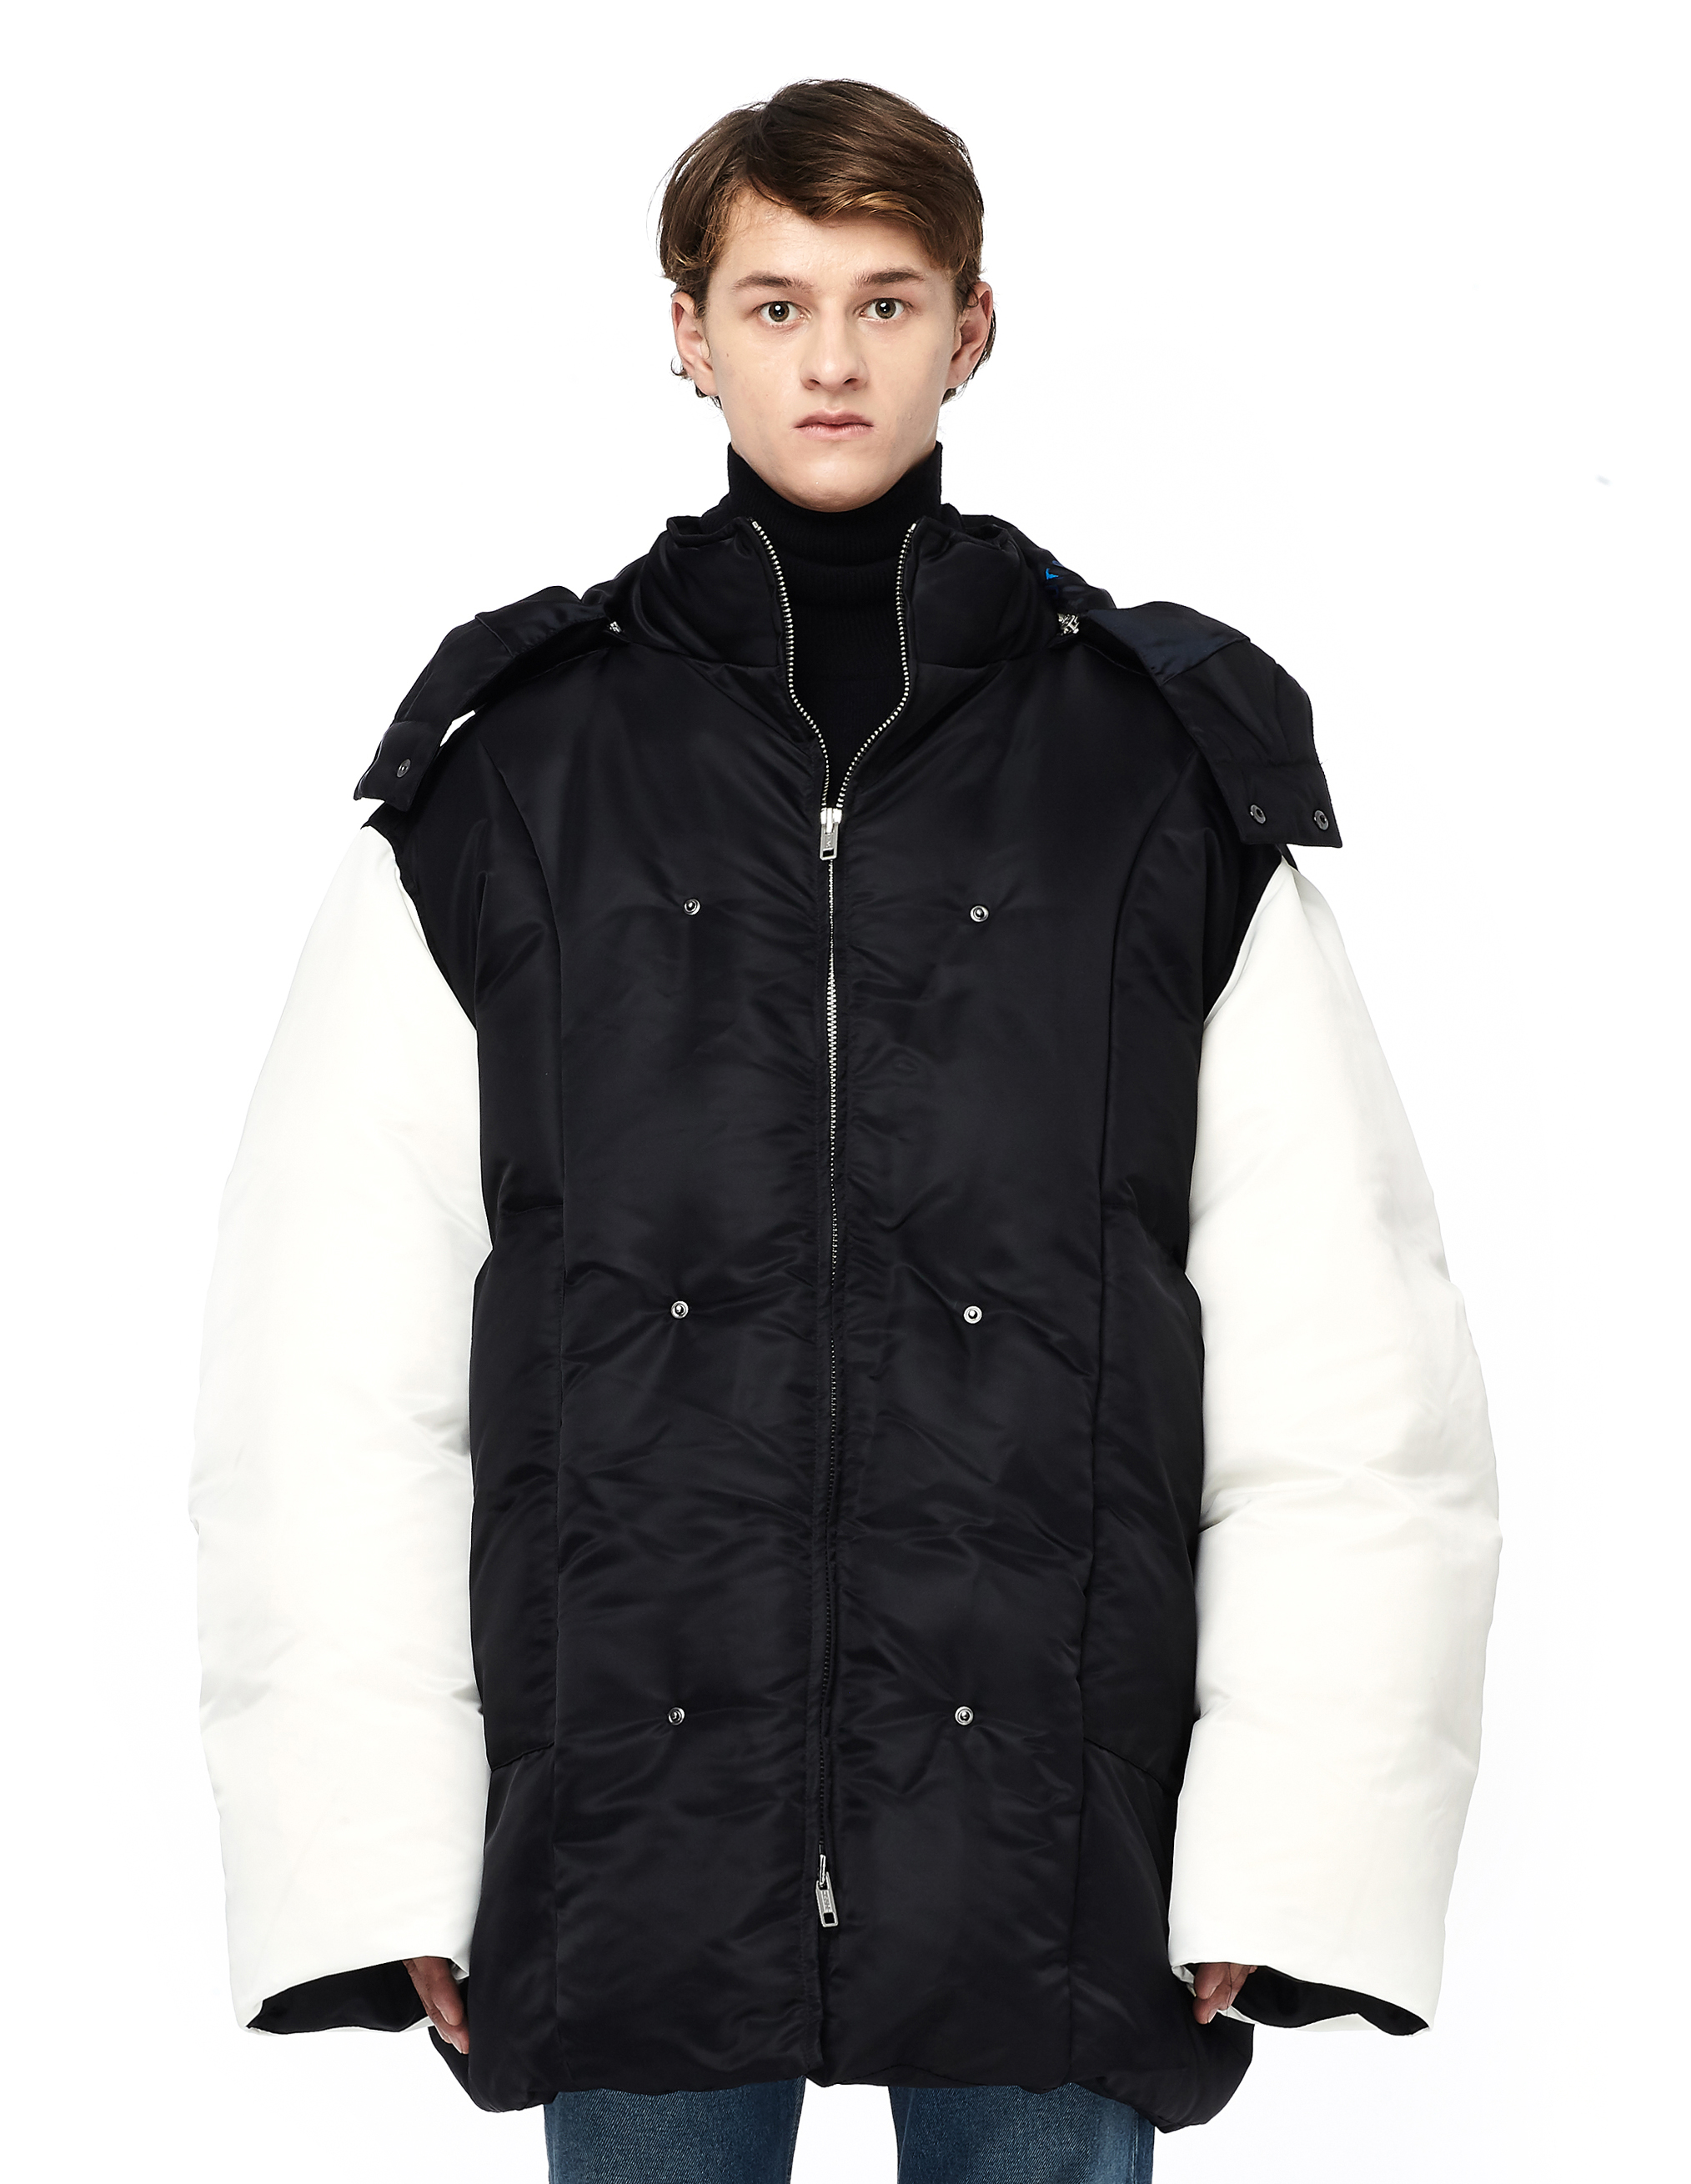 Raf Simons Oversized Puffer Jacket with Hood - Emanuel Cotton trousers